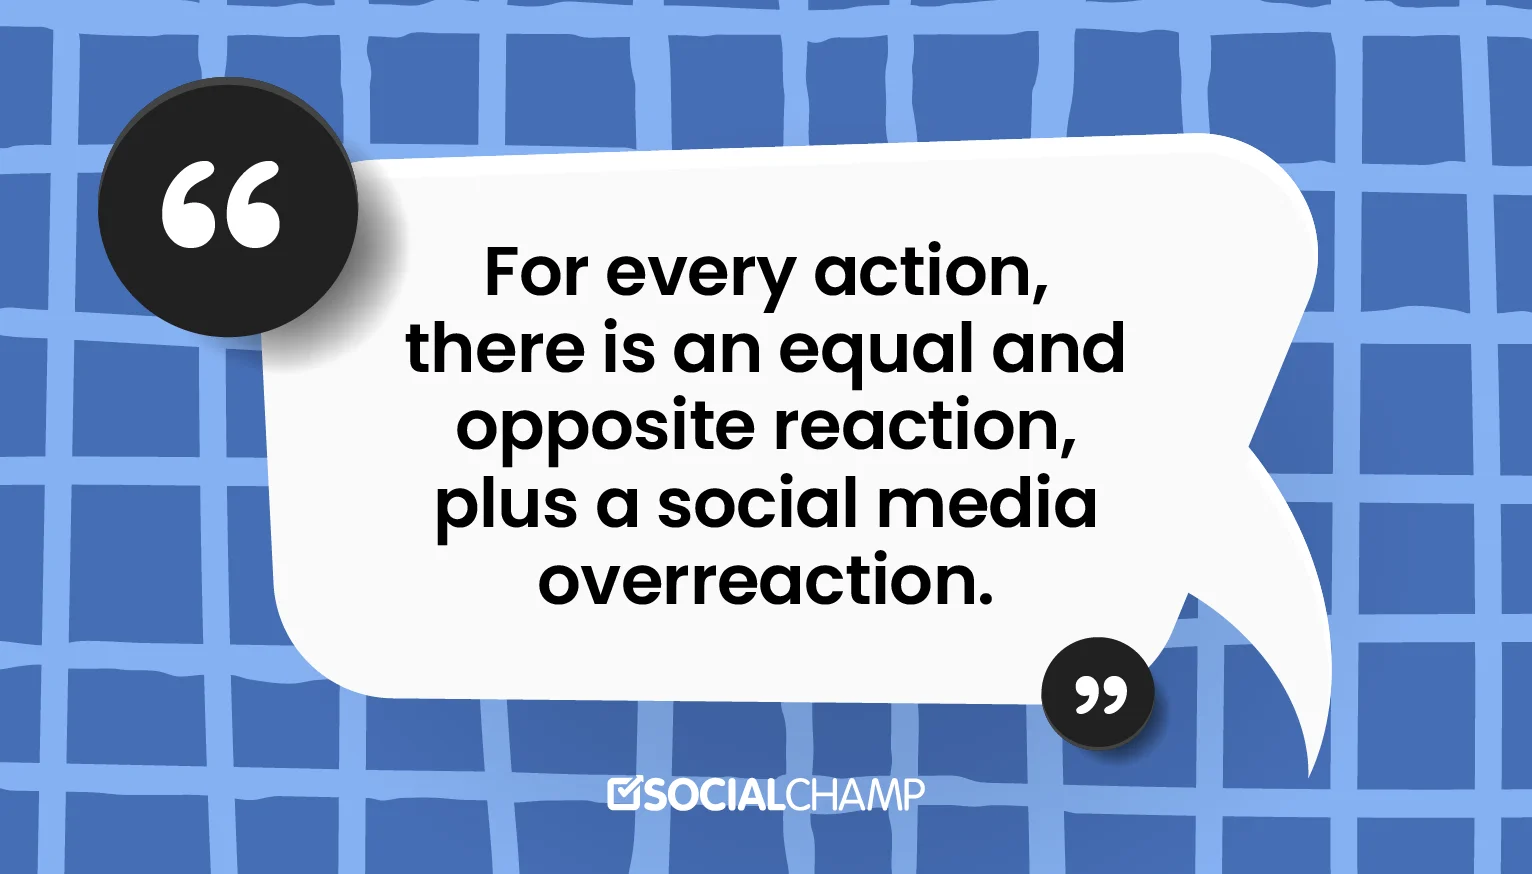 80+ Social Media Marketing Quotes To Boost Morale